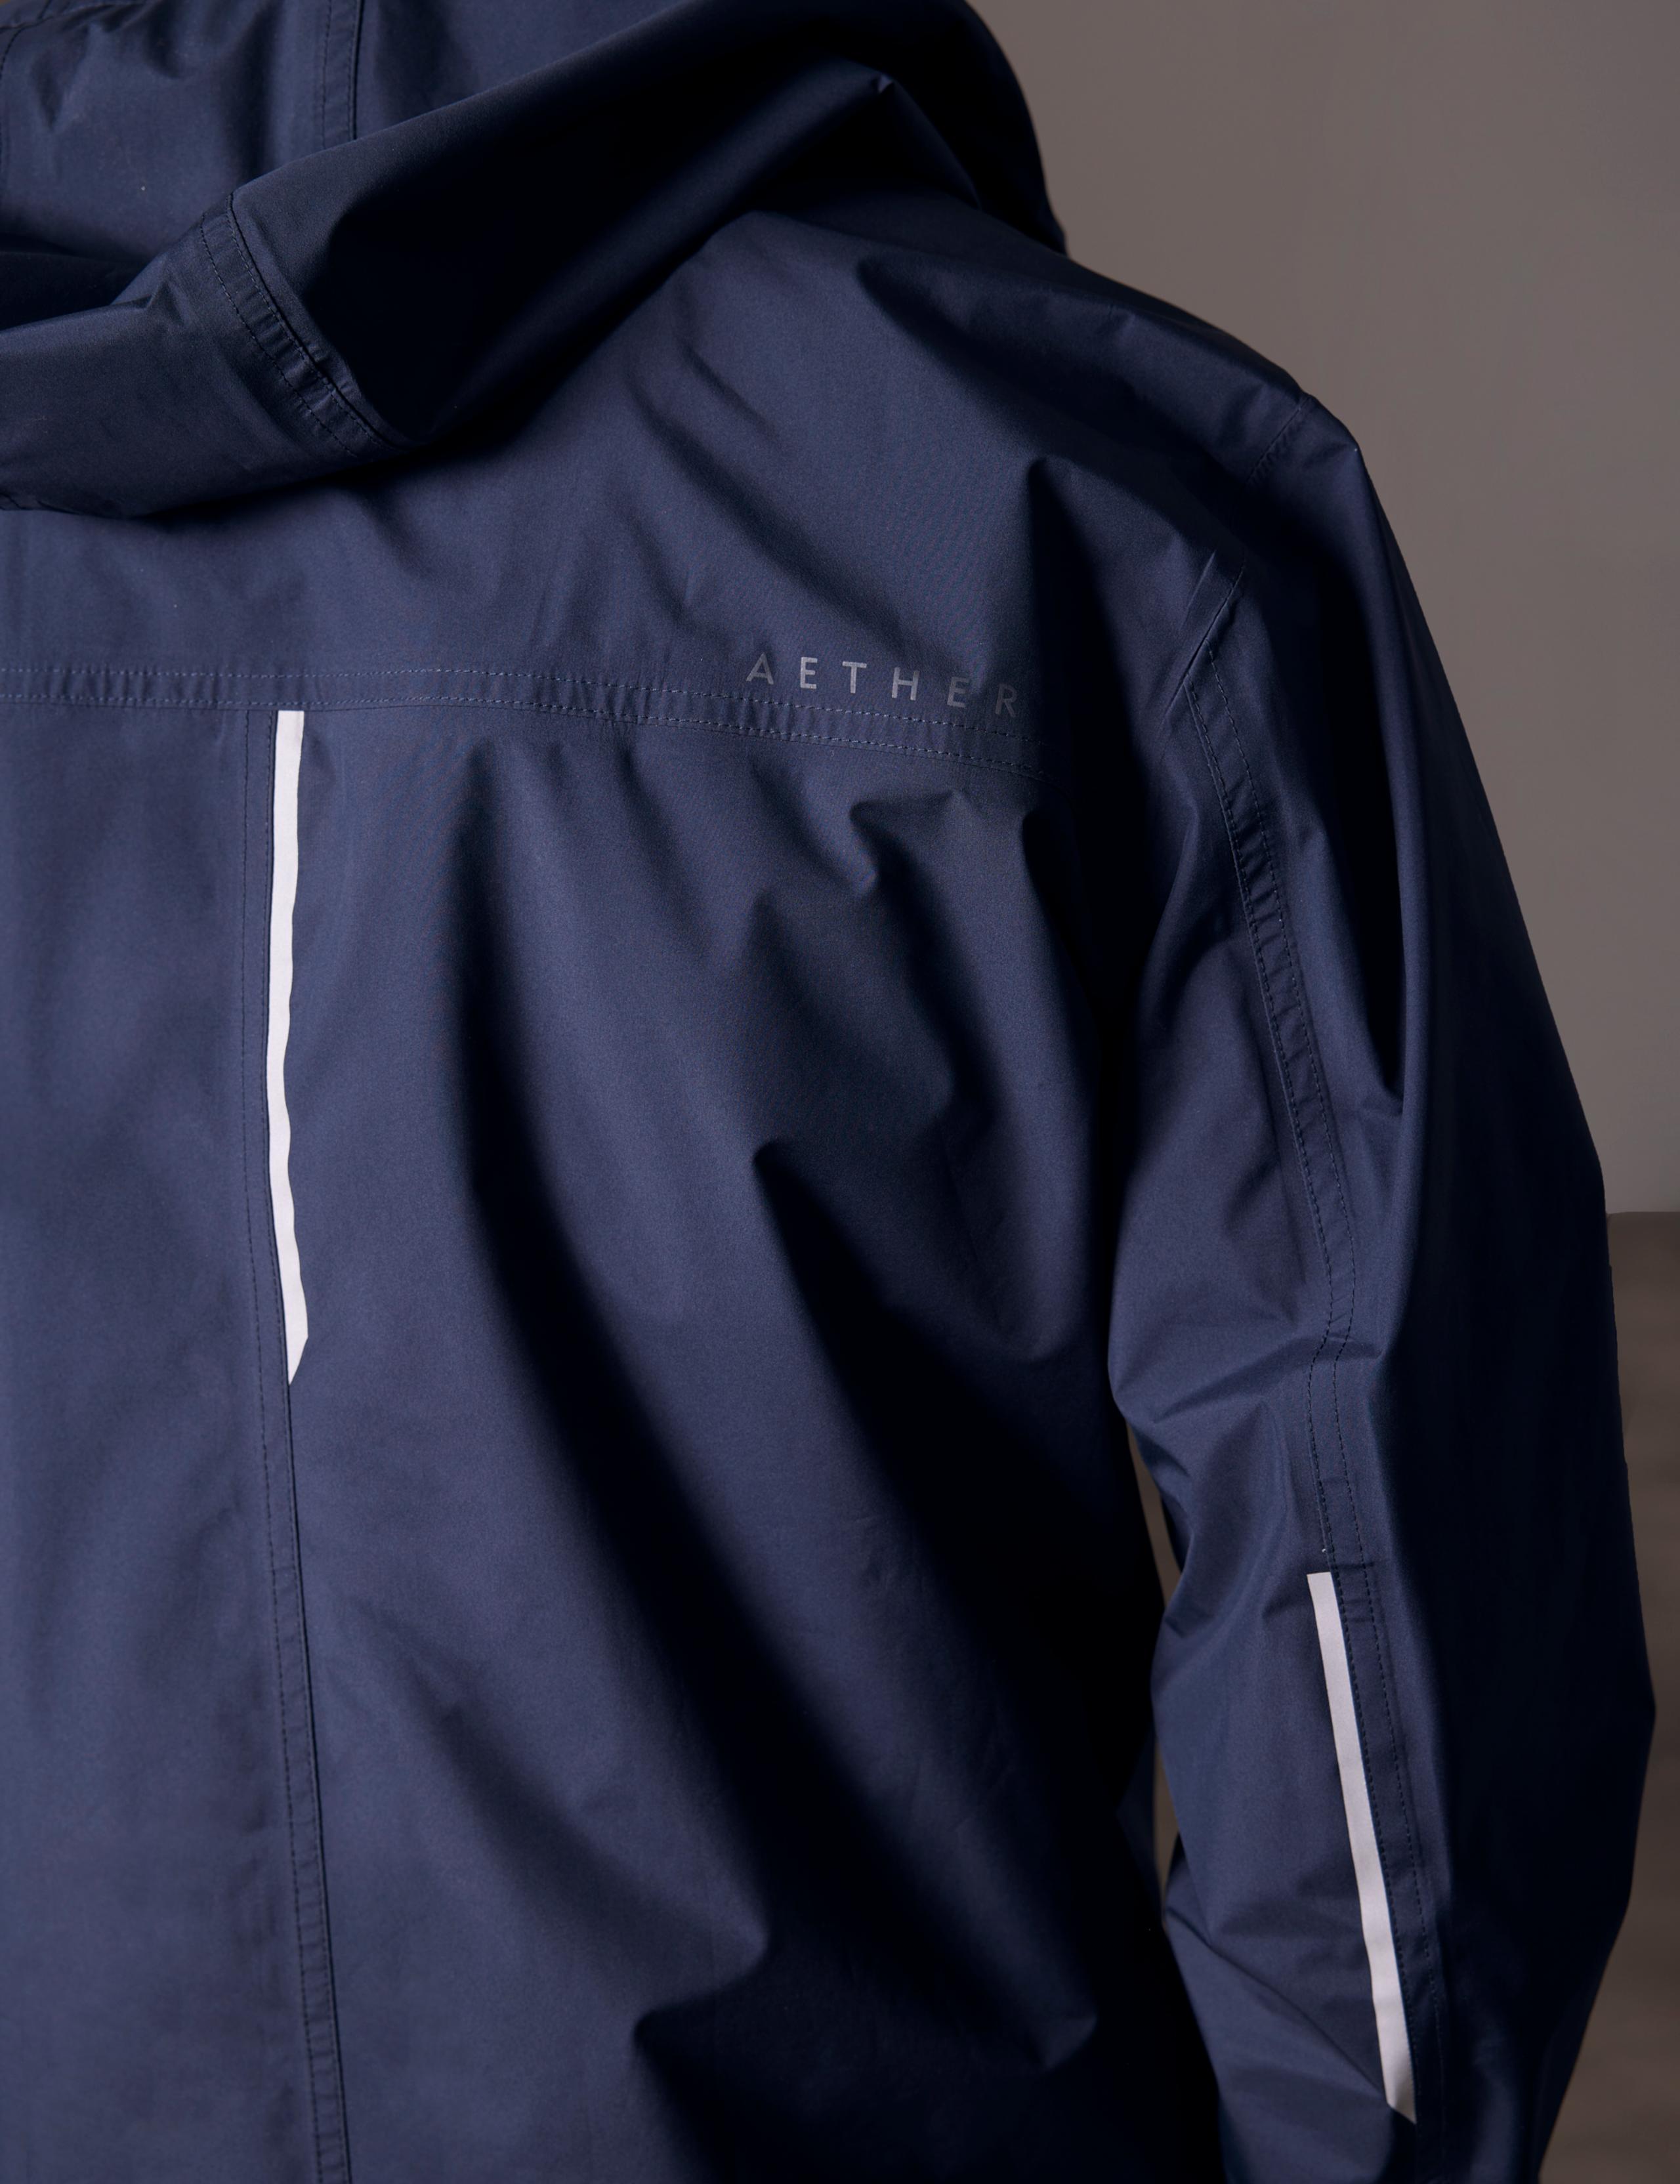 Detail of Storm All-Weather Jacket